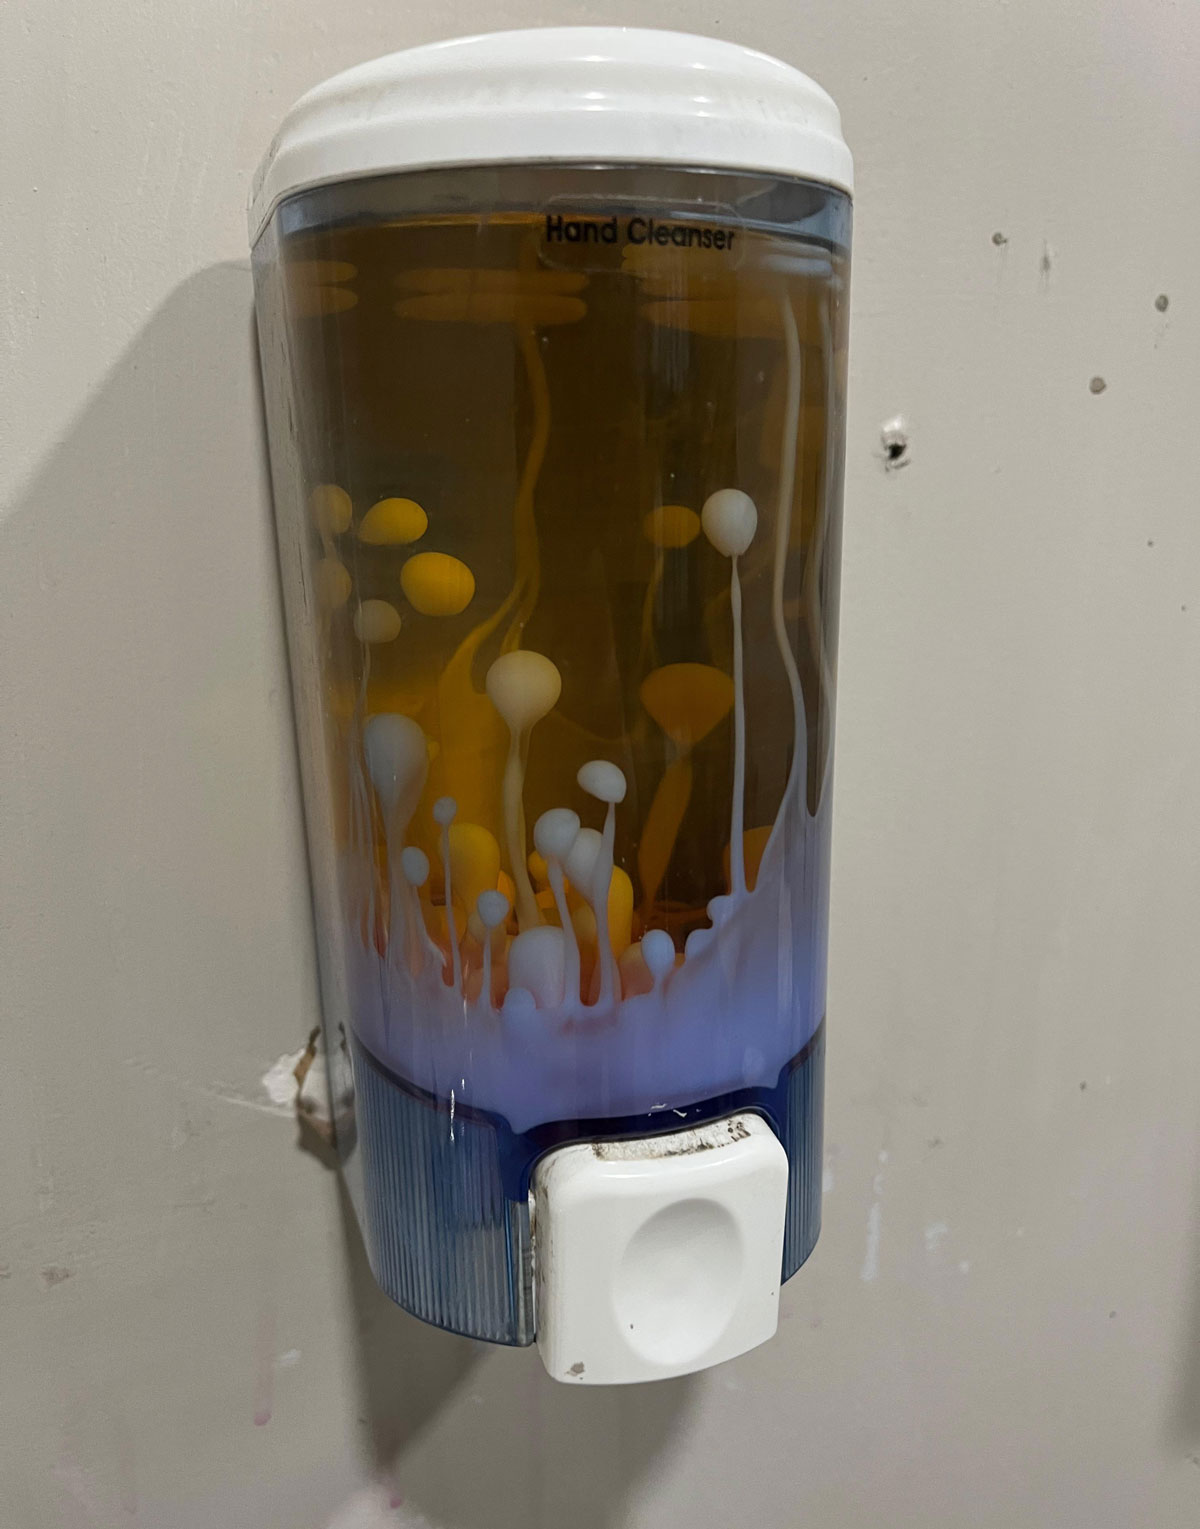 The soap dispenser at work is going through a lava lamp phase